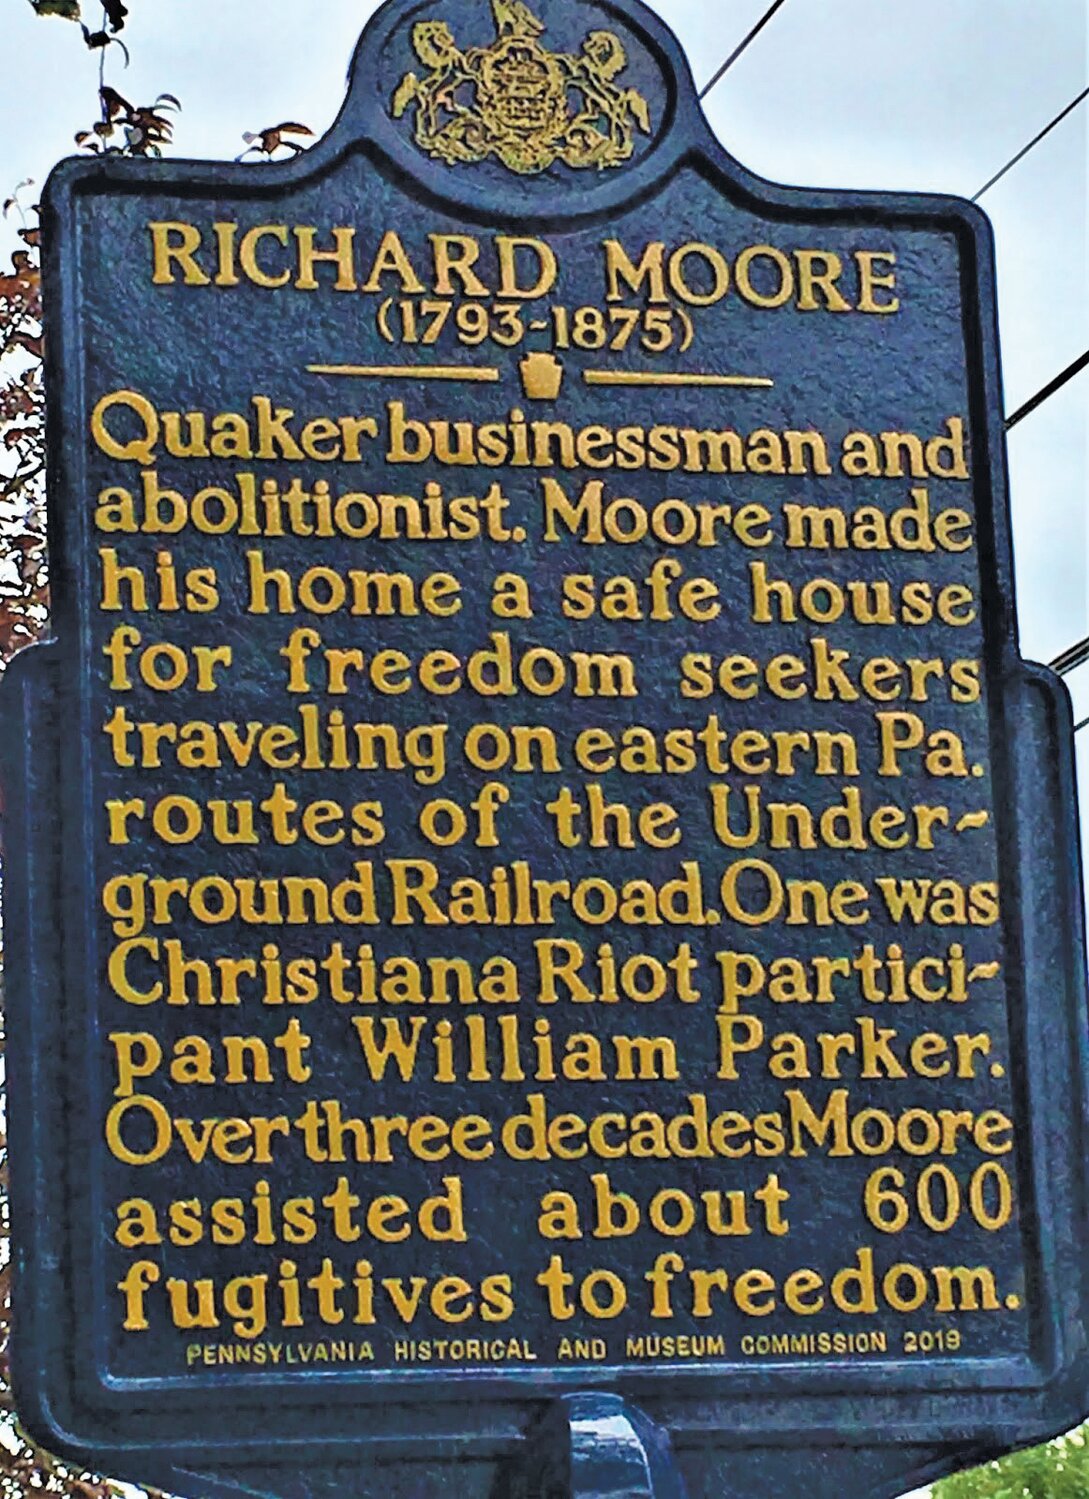 The Richard Moore House bears this marker identifying it as a “safe house” along the Underground Railroad.